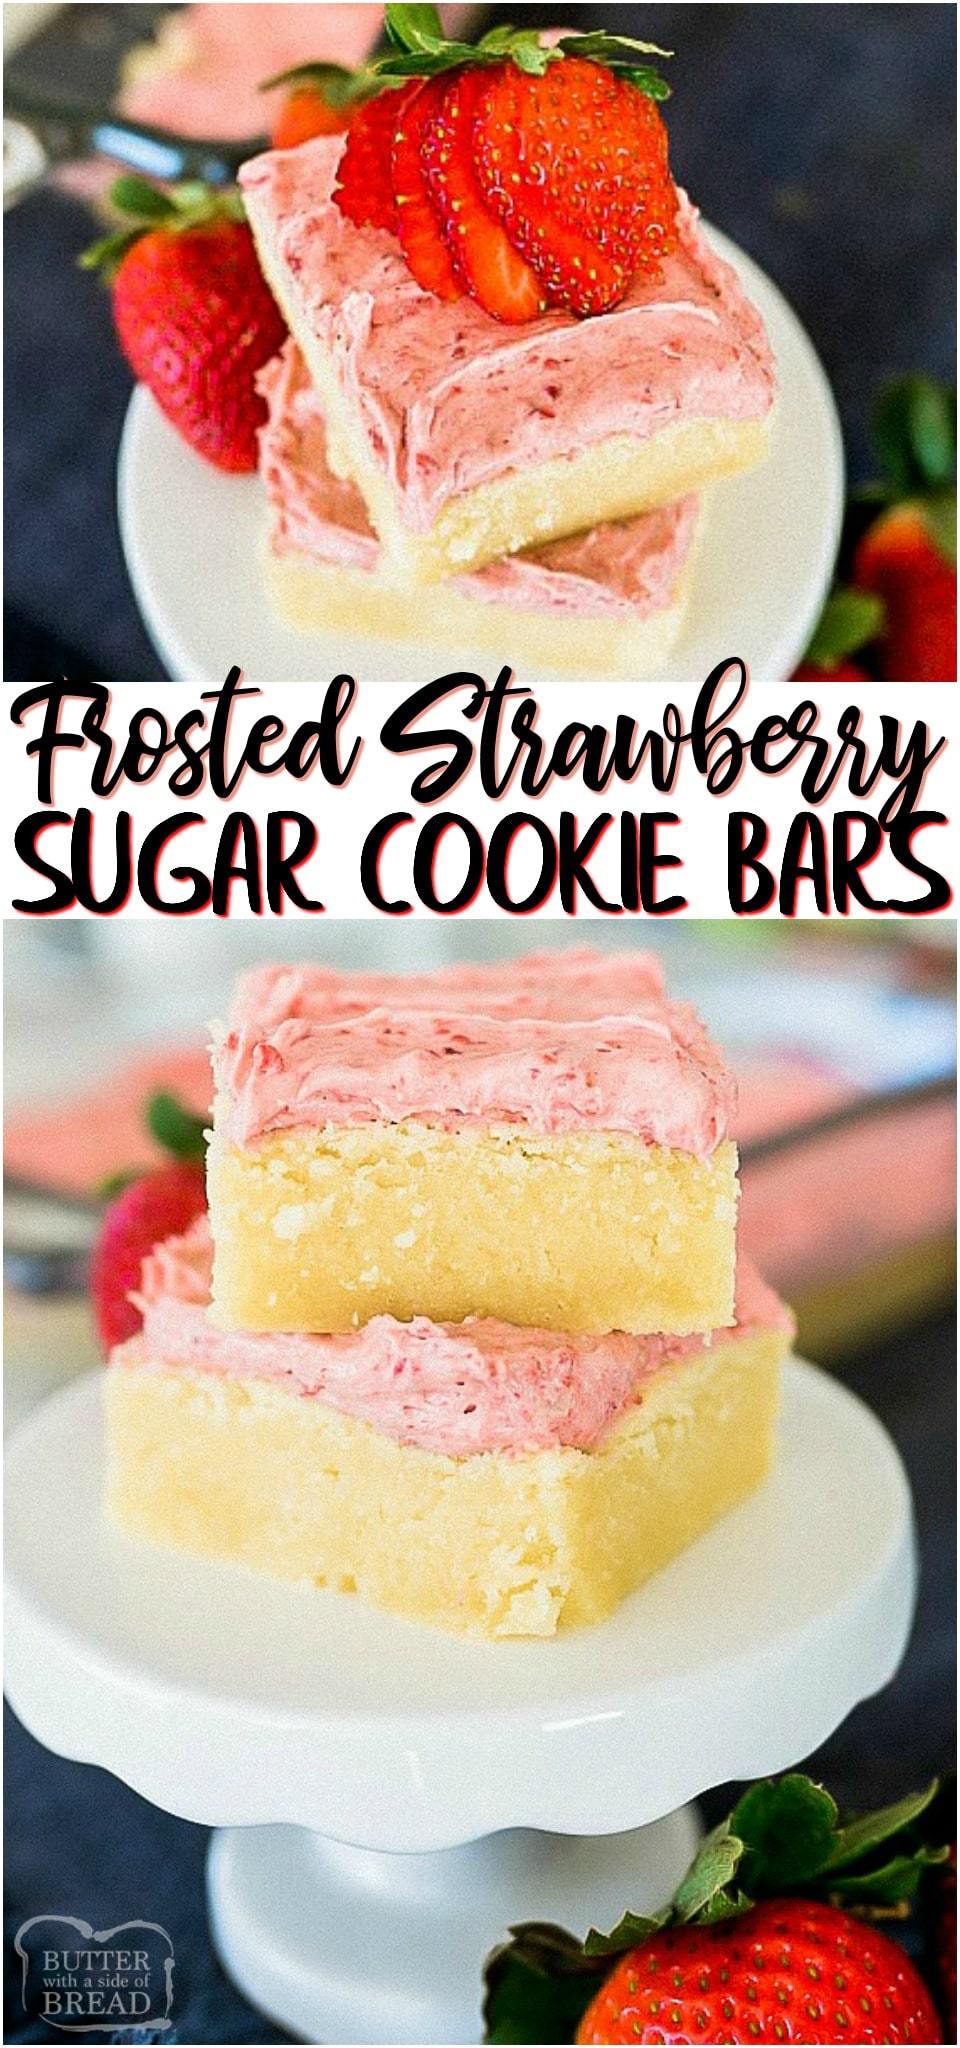 Sugar Cookie Bars with Strawberry Frosting is the perfect spring-time dessert! The fruity frosting is the perfect way to level up your dessert! #sugarcookie #cookiebars #cookies #strawberry #frosting #dessert #recipe from BUTTER WITH A SIDE OF BREAD